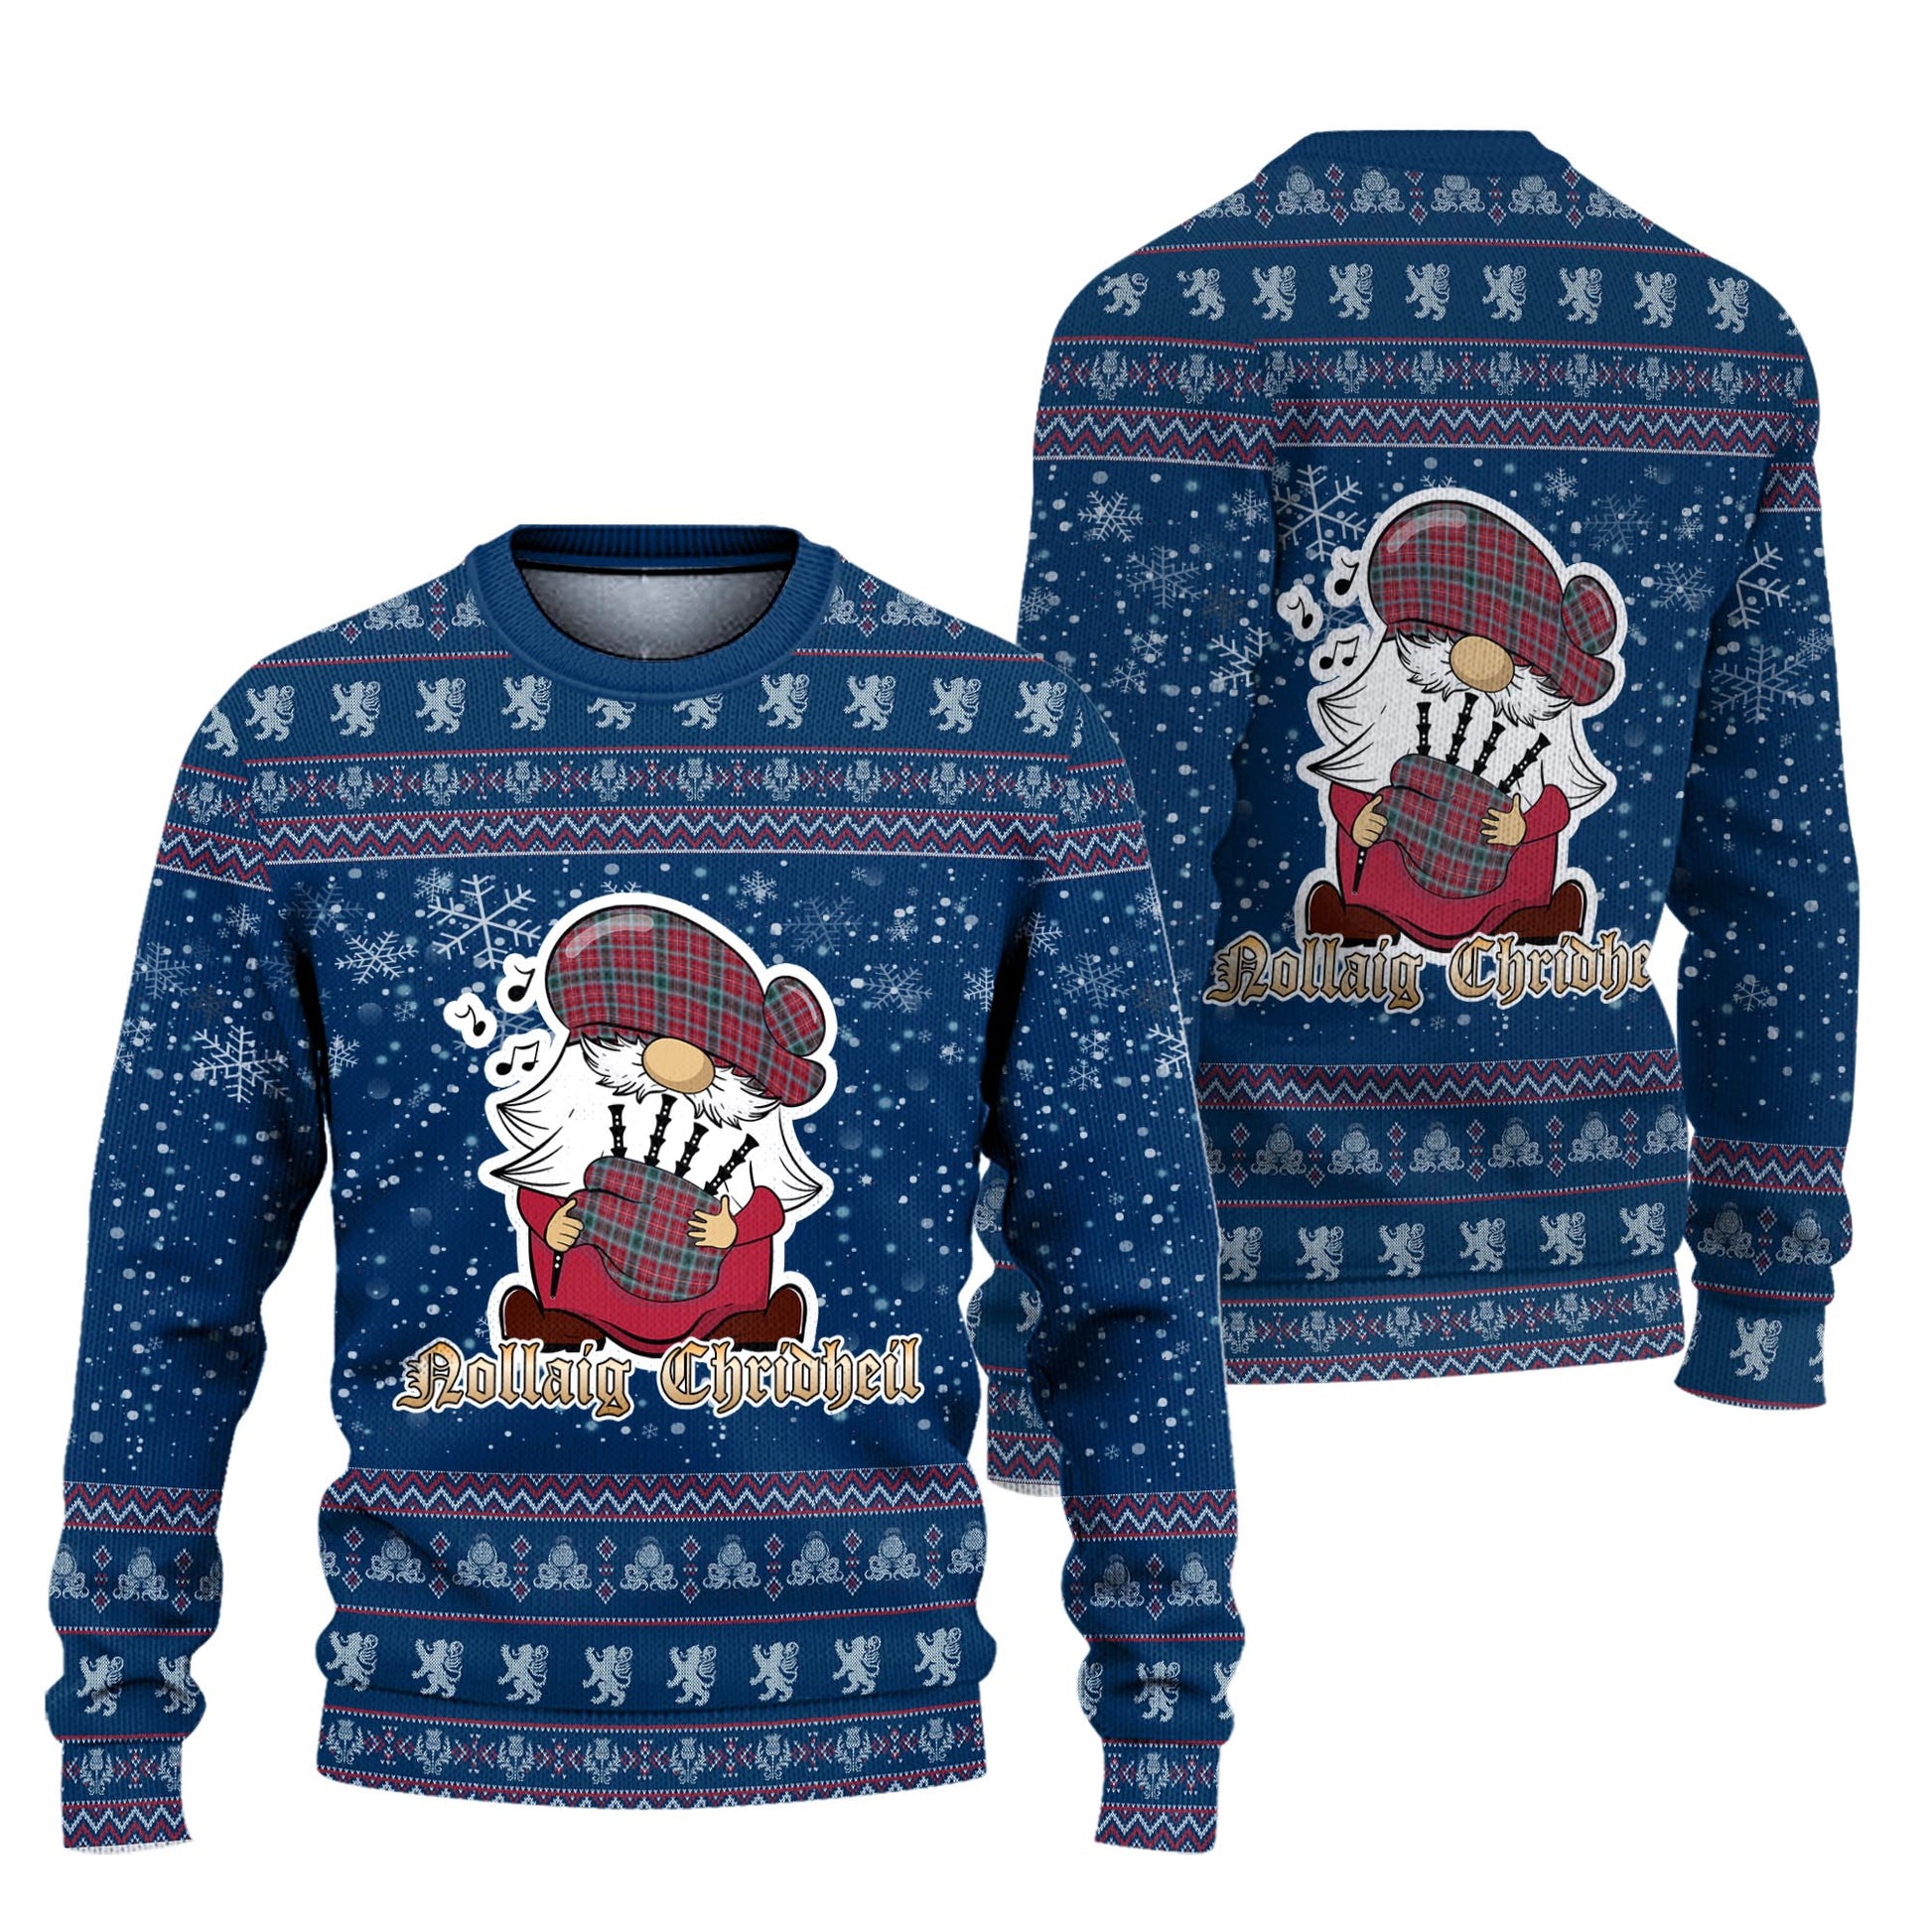 British Columbia Province Canada Clan Christmas Family Knitted Sweater with Funny Gnome Playing Bagpipes Unisex Blue - Tartanvibesclothing